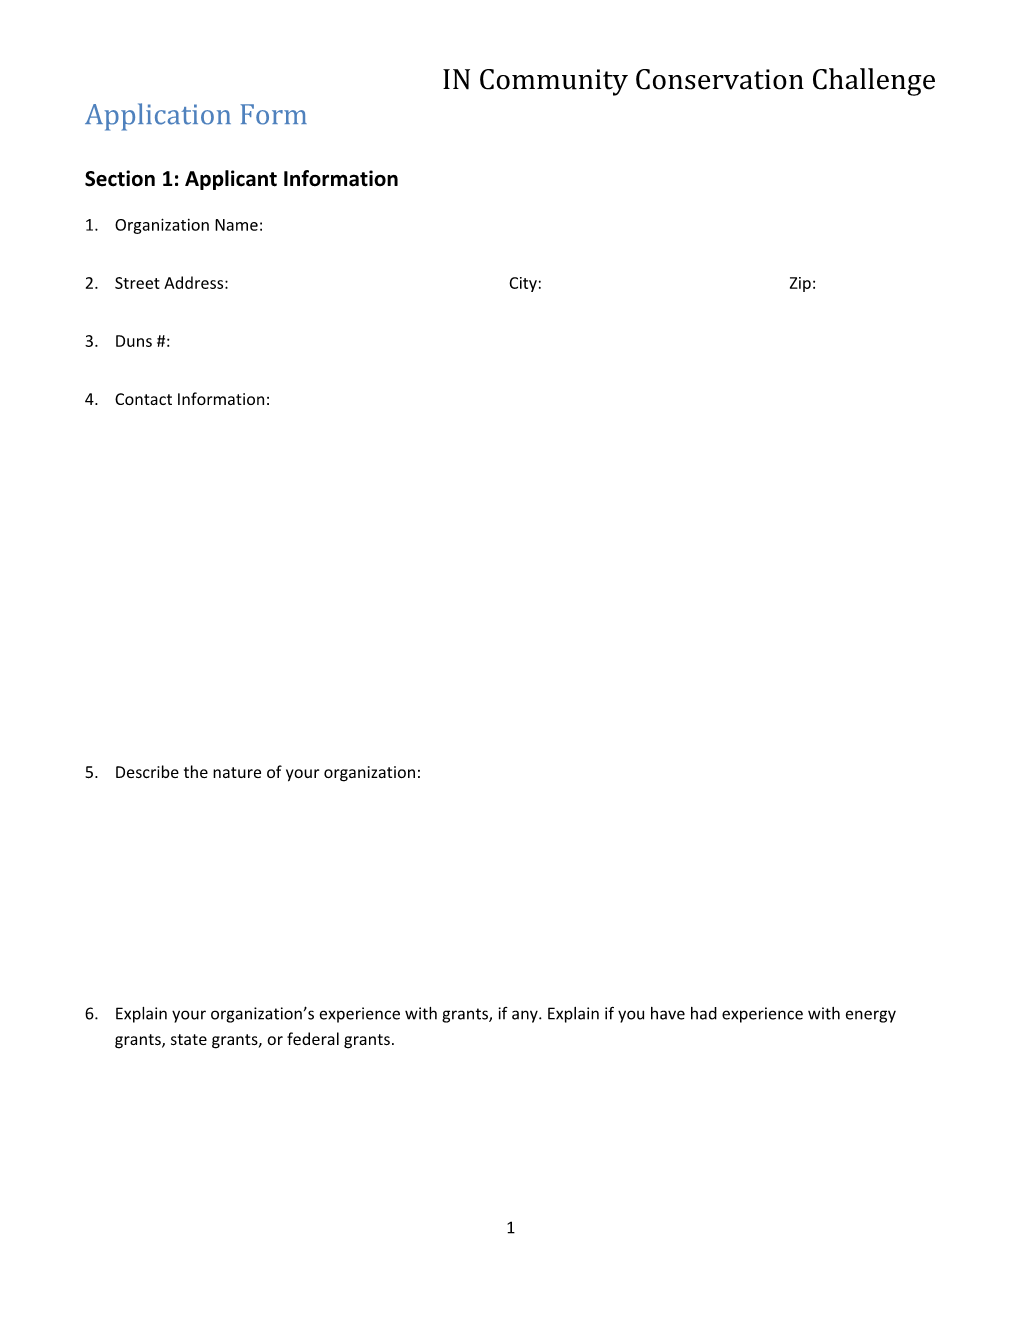 Section 1: Applicant Information